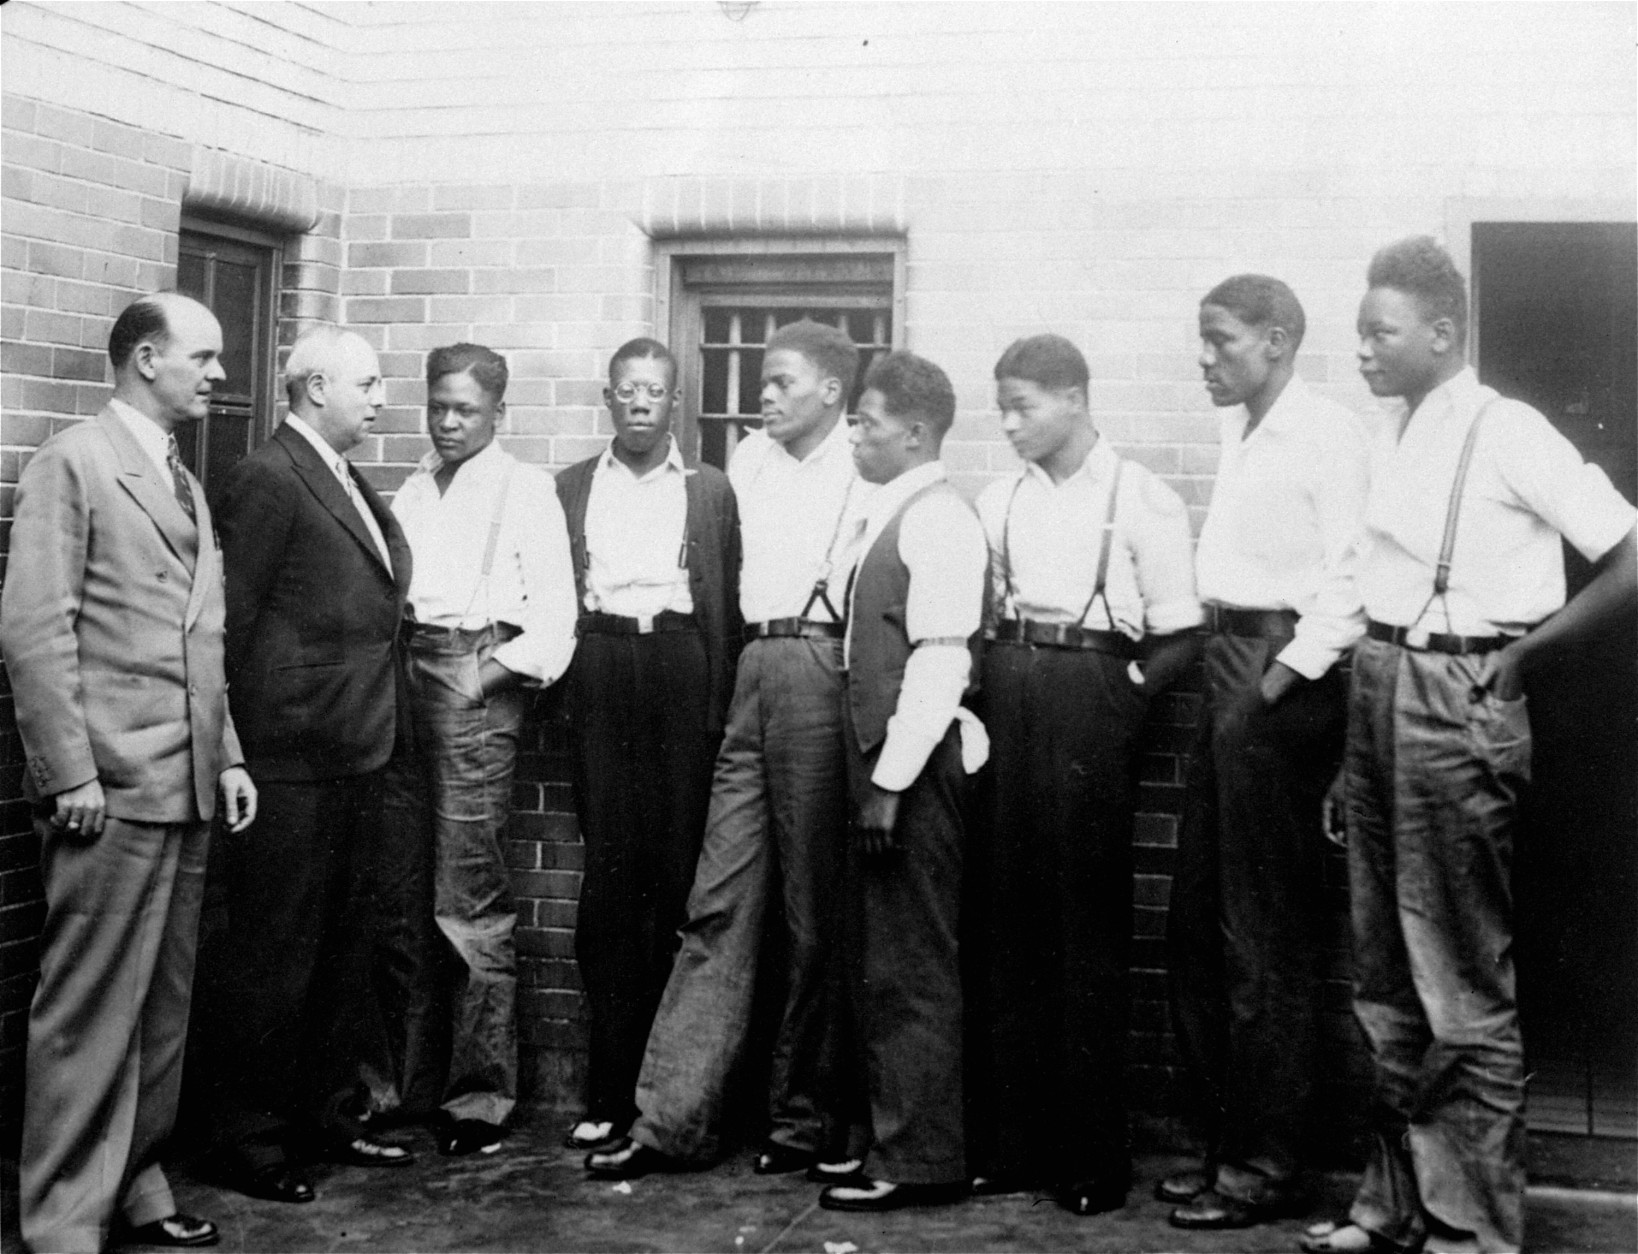 Just after he asked the Governor of Alabama to pardon the nine youths held in the Scottsboro case, Samuel Leibowitz, New York attorney, conferred with seven of the defendants, May 1, 1935, at the Scottsboro jail.  Left to right are:  Deputy Sheriff Charles McComb, Leibowitz, and the defendants, Roy Wright, Olen Montgomery, Ozie Powell, Willie Robertson, Eugene Williams, Charlie Weems, and Andy Wright.  The youths were charged with an attack on two white women on March 25, 1931.  (AP Photo)